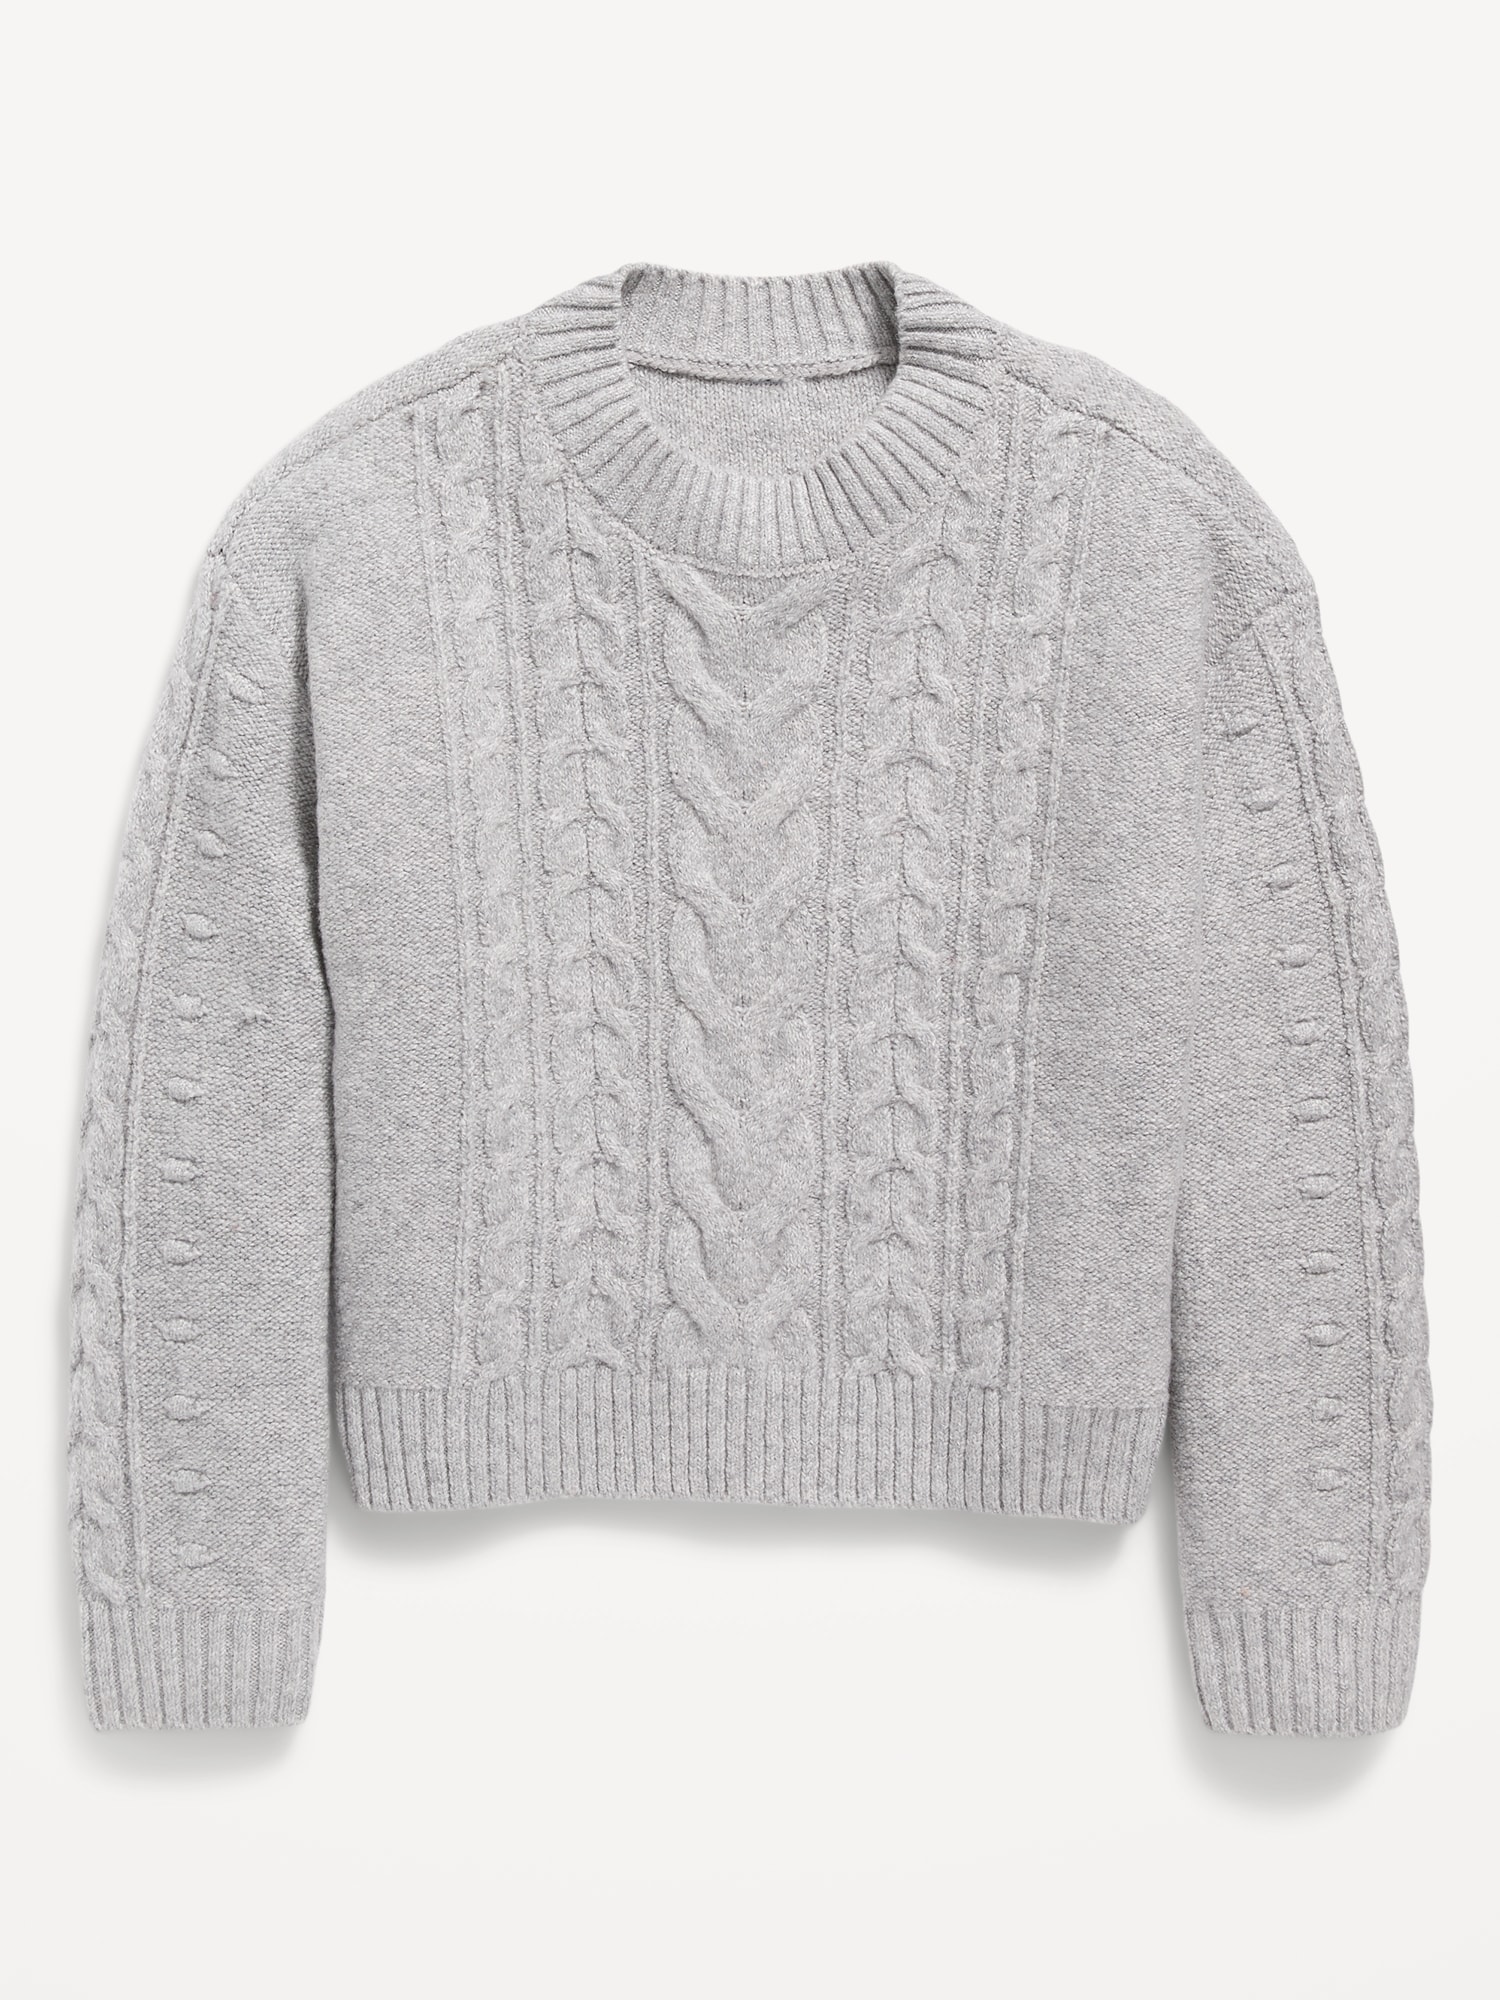 Cozy Cable-Knit Mock-Neck Sweater for Girls